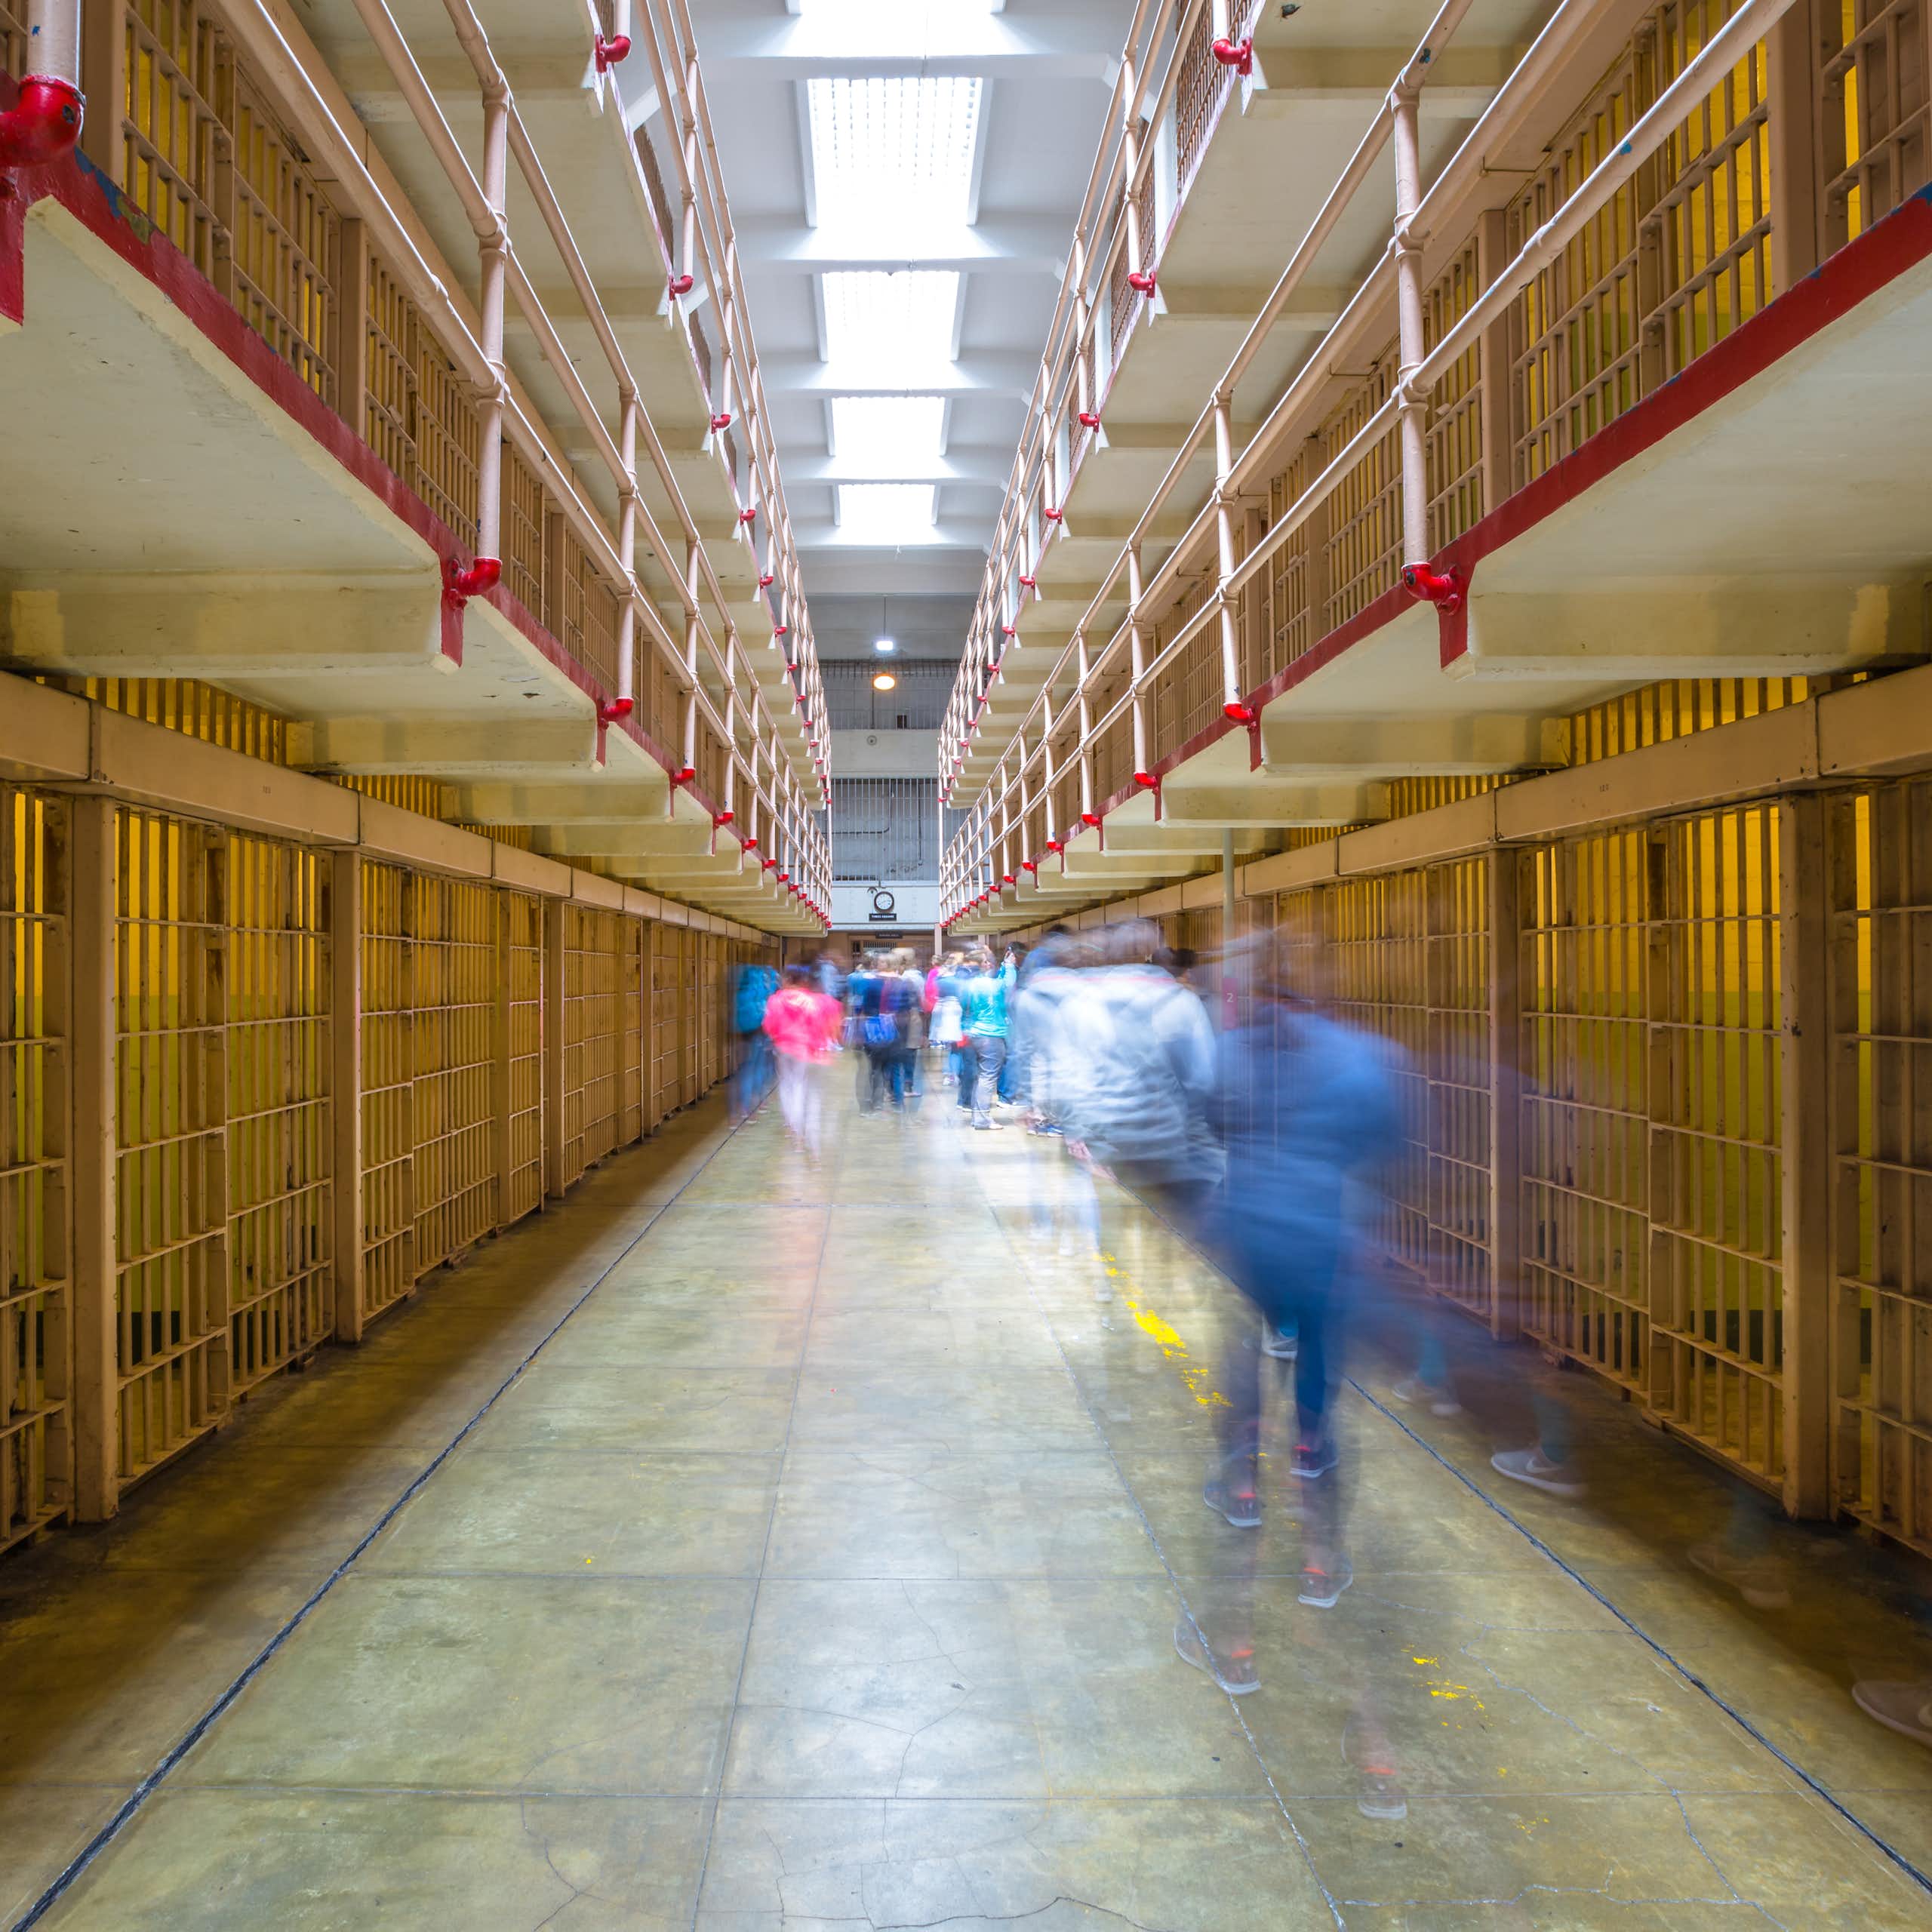 A hall of prison cells with blurred people moving throughout